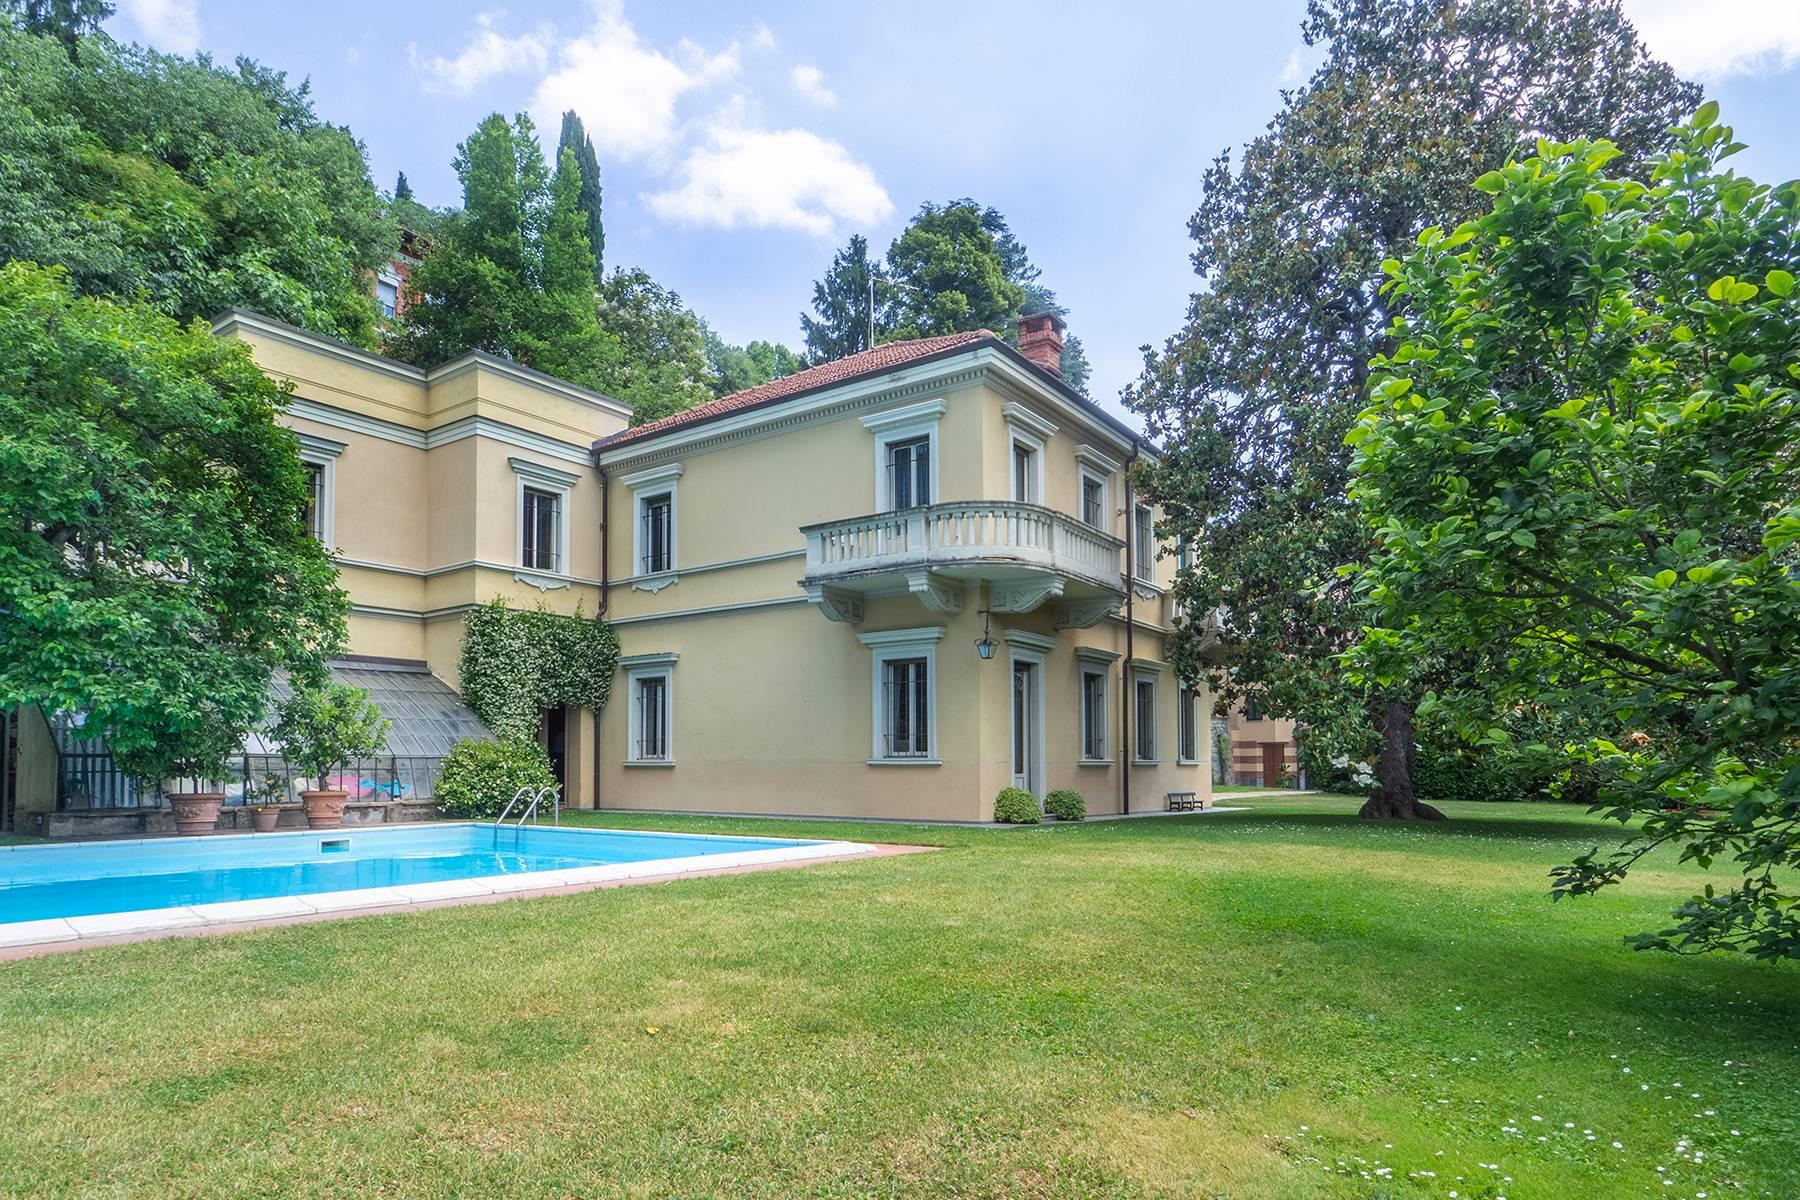 Exquisite villa with swimming pool in the hill of Turin - 3